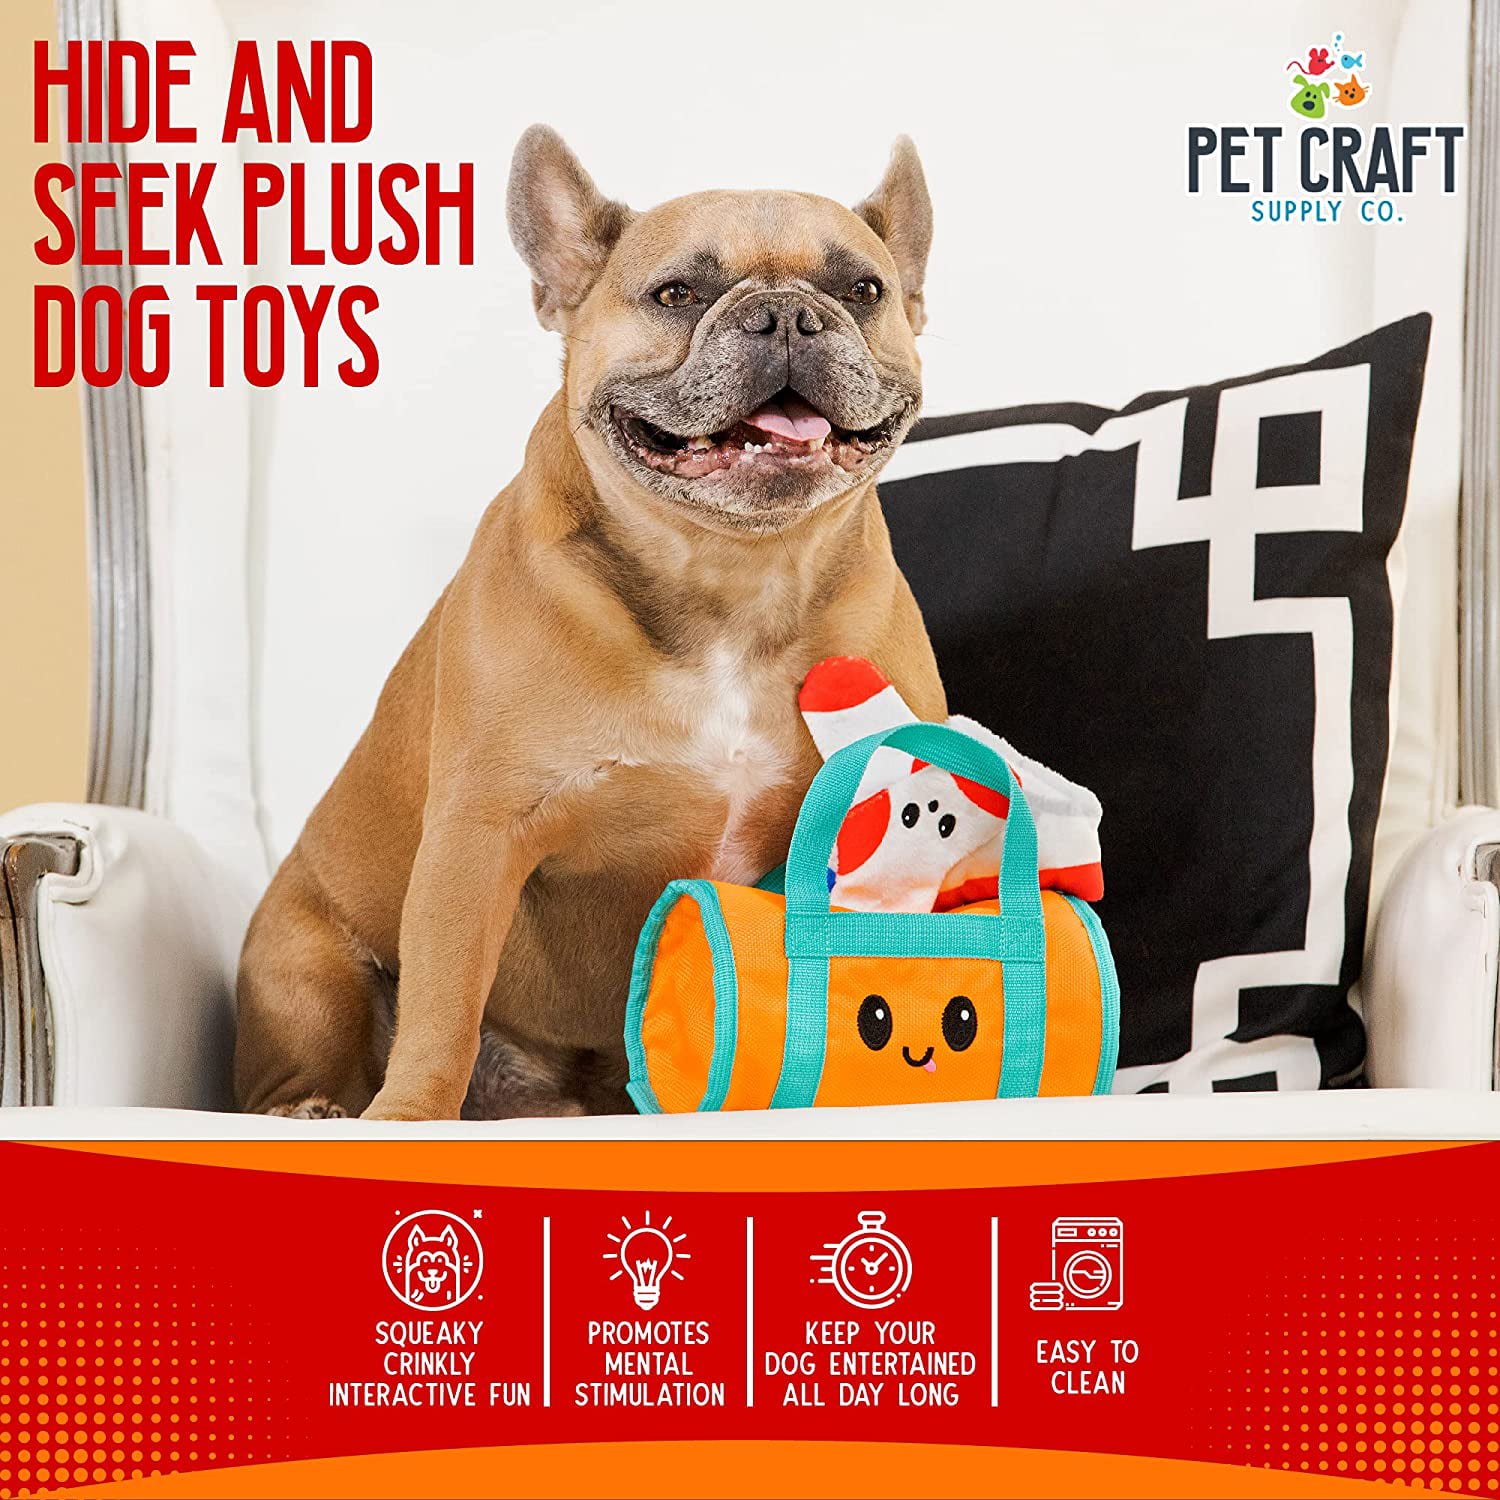 Pet Craft Supply Hide and Seek Plush Dog Toys Crinkle Squeaky Interactive Burrow Activity Puzzle Chew Fetch Treat Hiding Brain Stimulating Cute Funny Toy Bundle Pack for Small and Medium Dogs Puppies